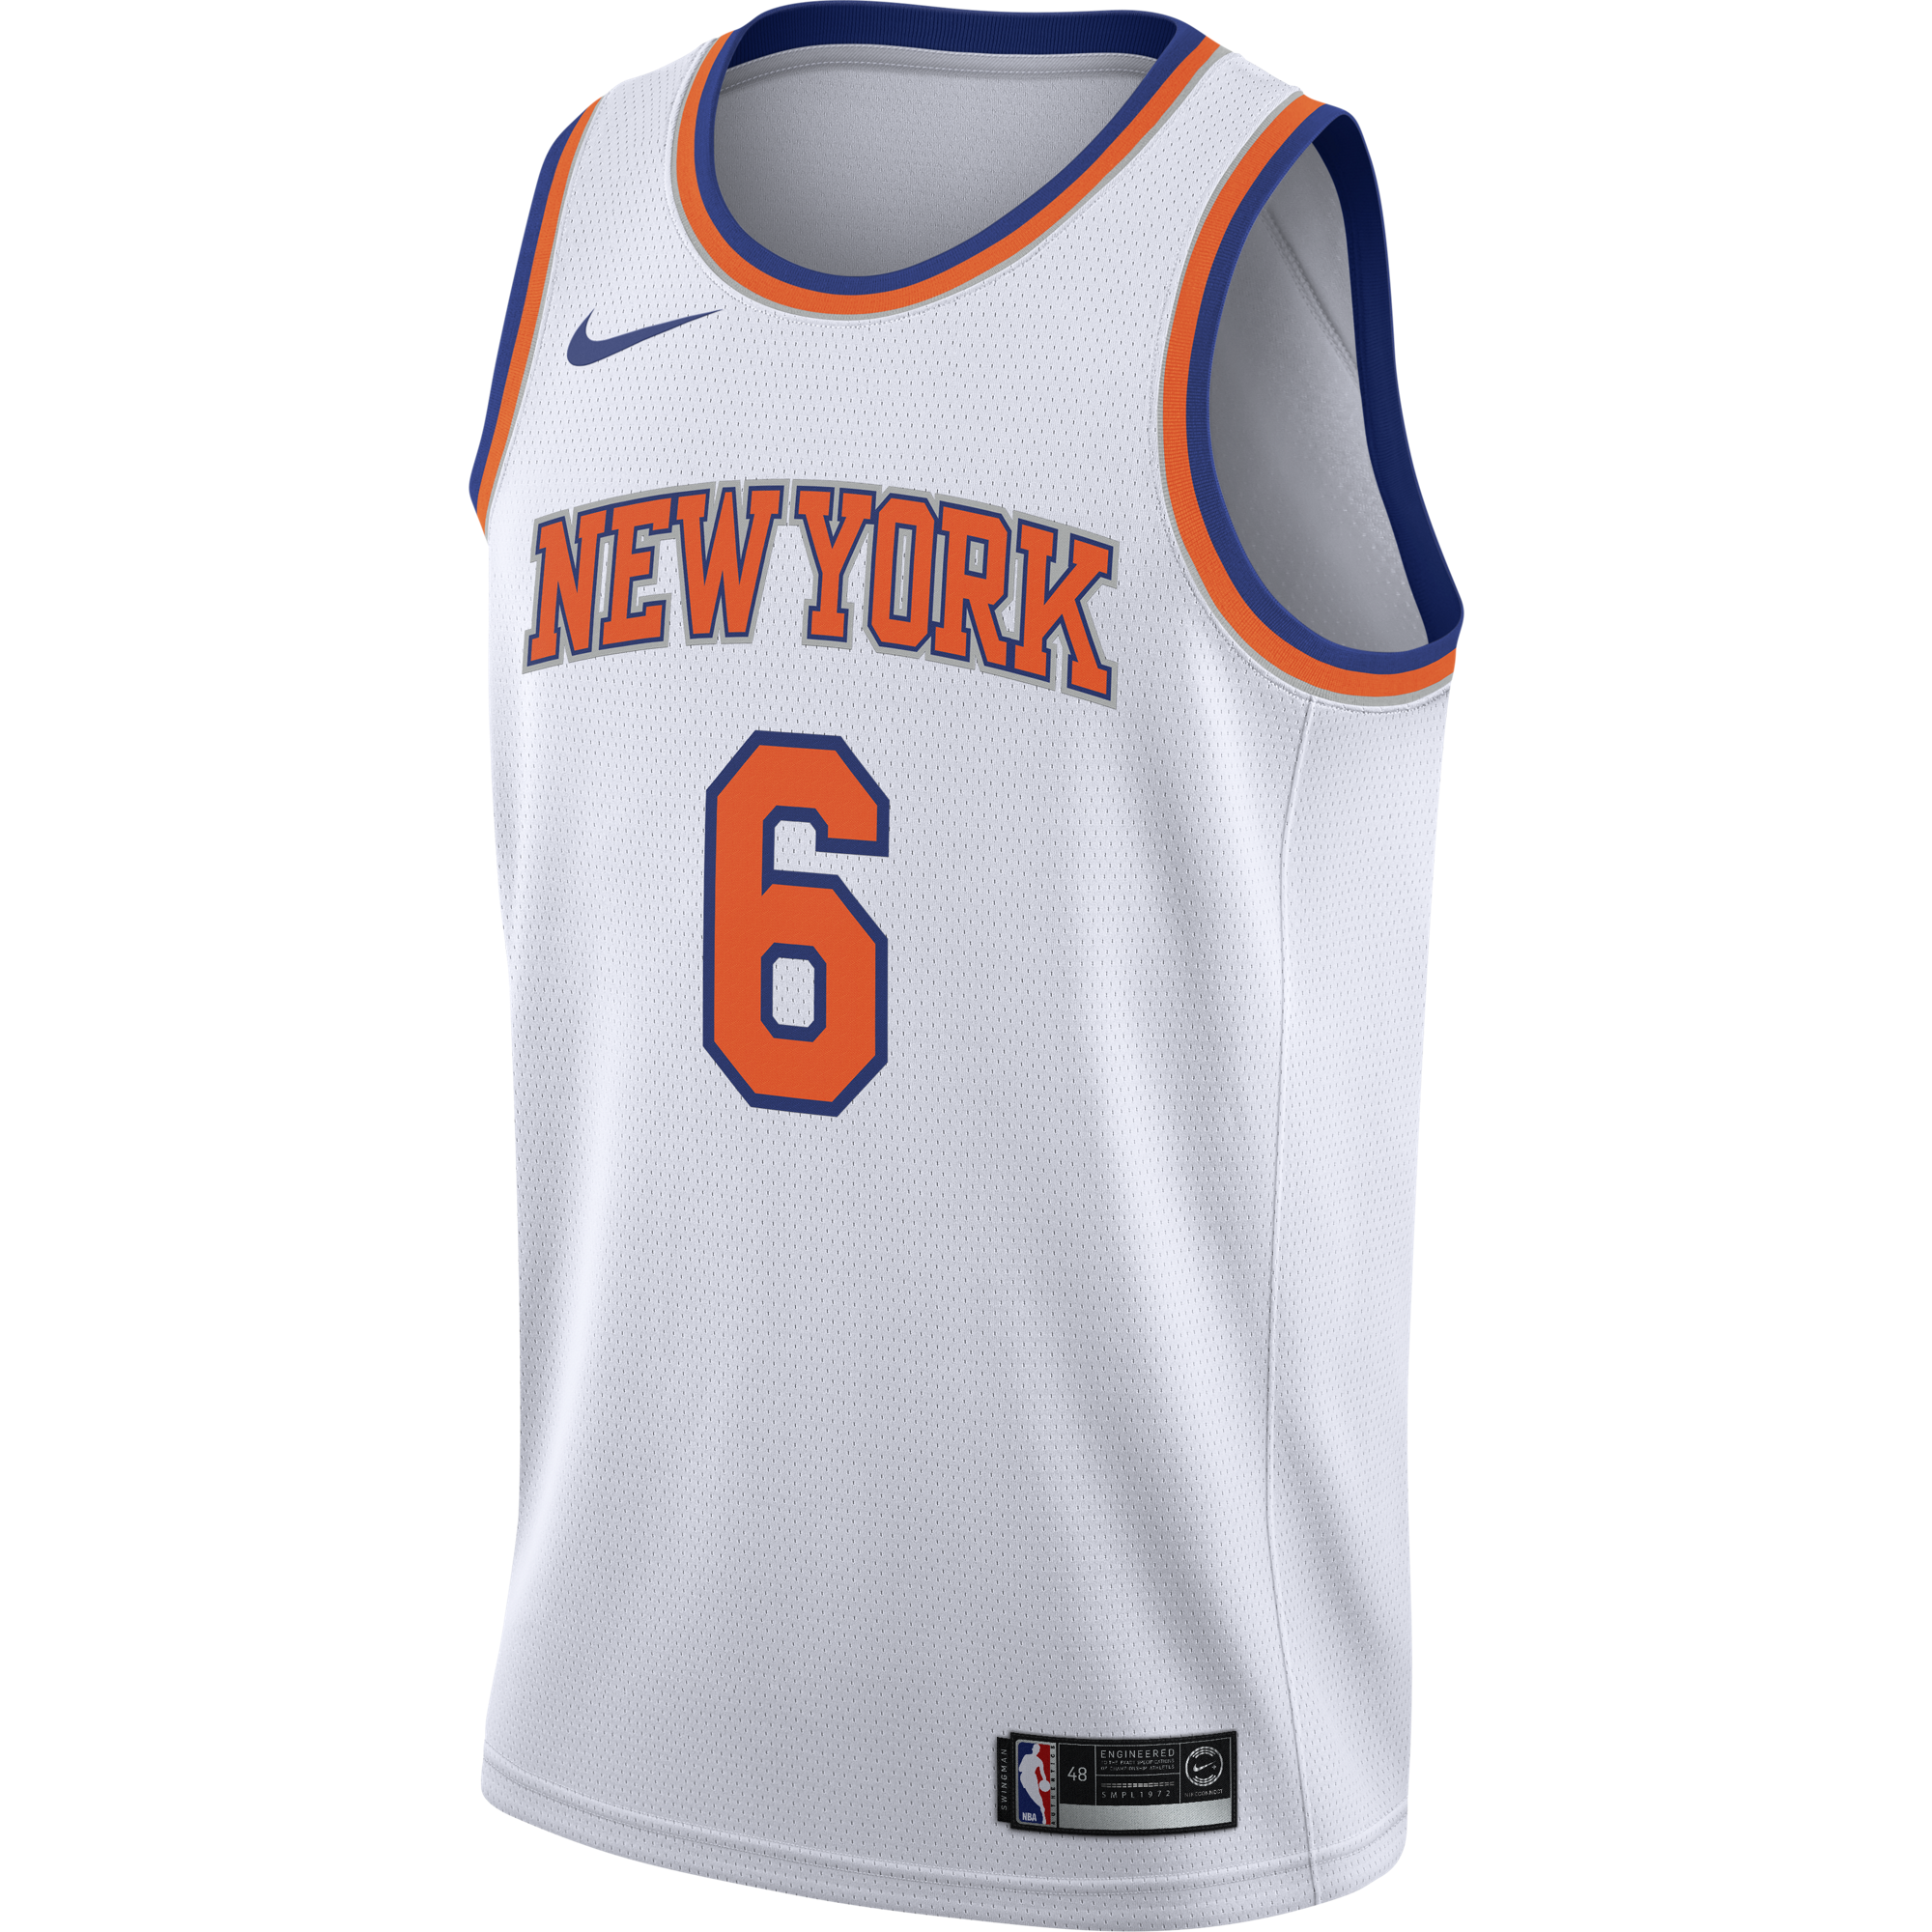 National September 11 Memorial & Museum - New on View: New York Knicks  jersey honoring firefighters and their families. This game-worn jersey by  former Knicks player Kristaps Porzingis, who recently joined the